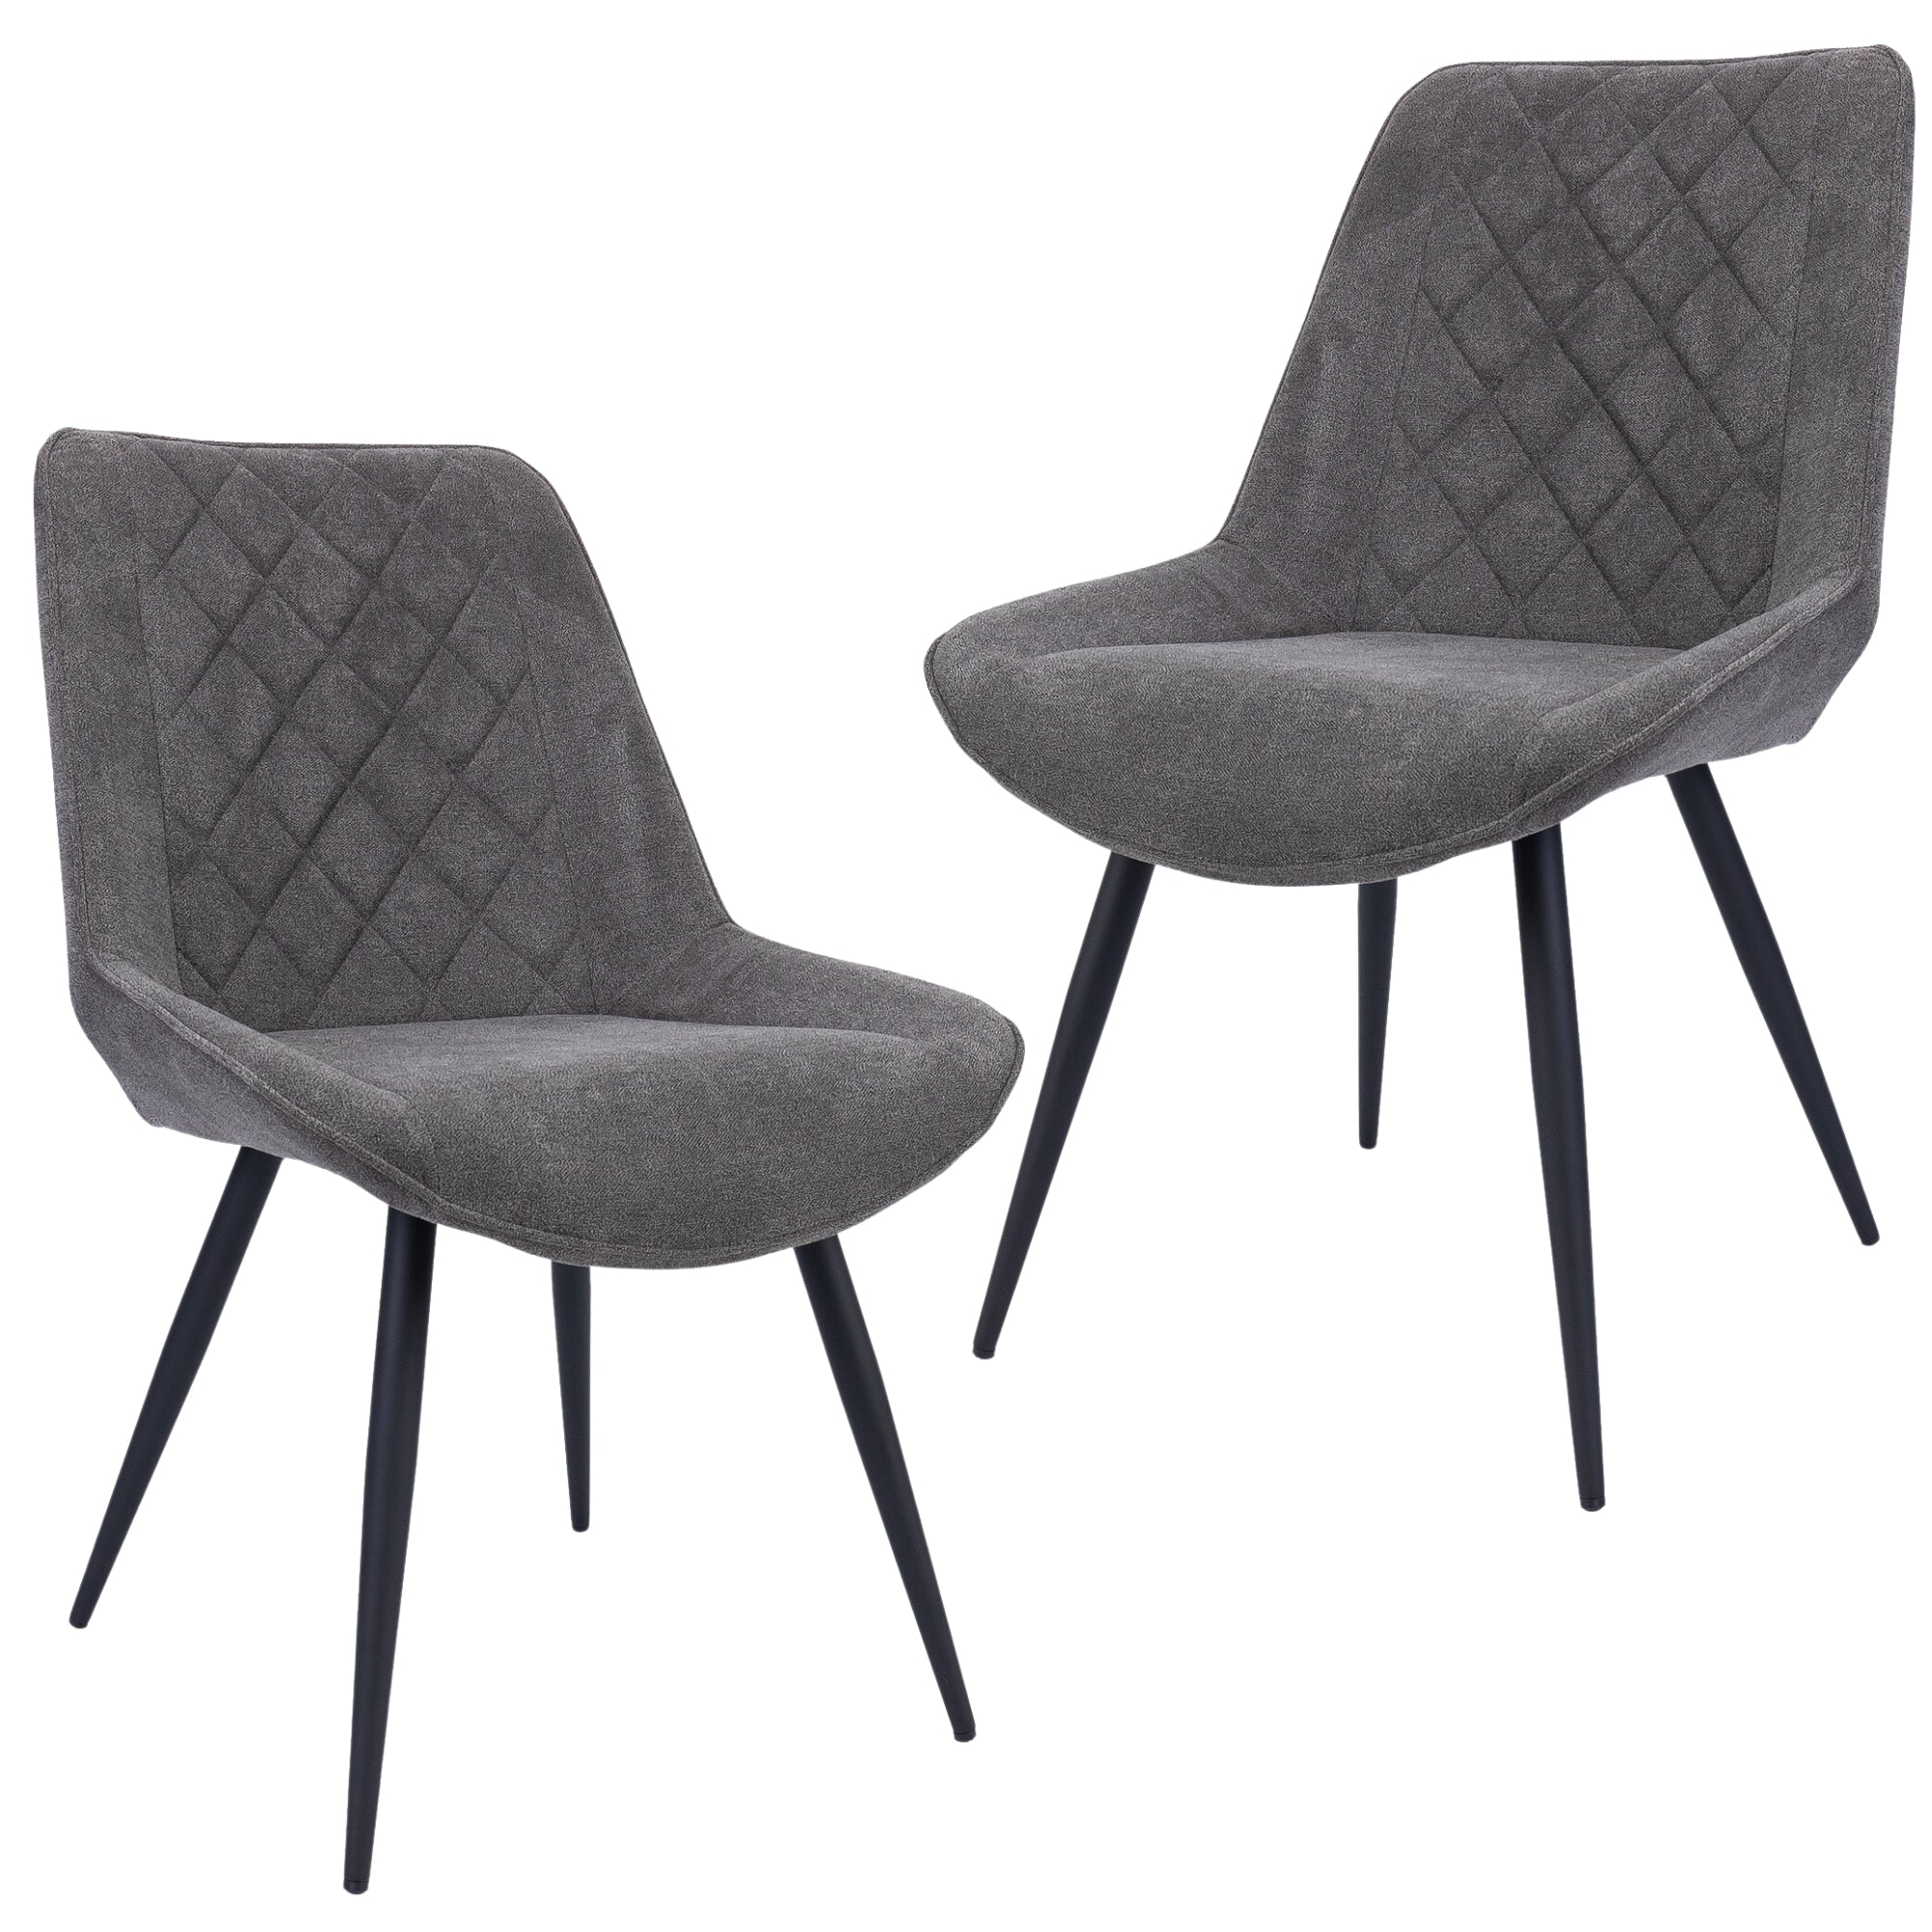 Helenium Dining Chair Set of 2 Fabric Seat with Metal Frame - Graphite